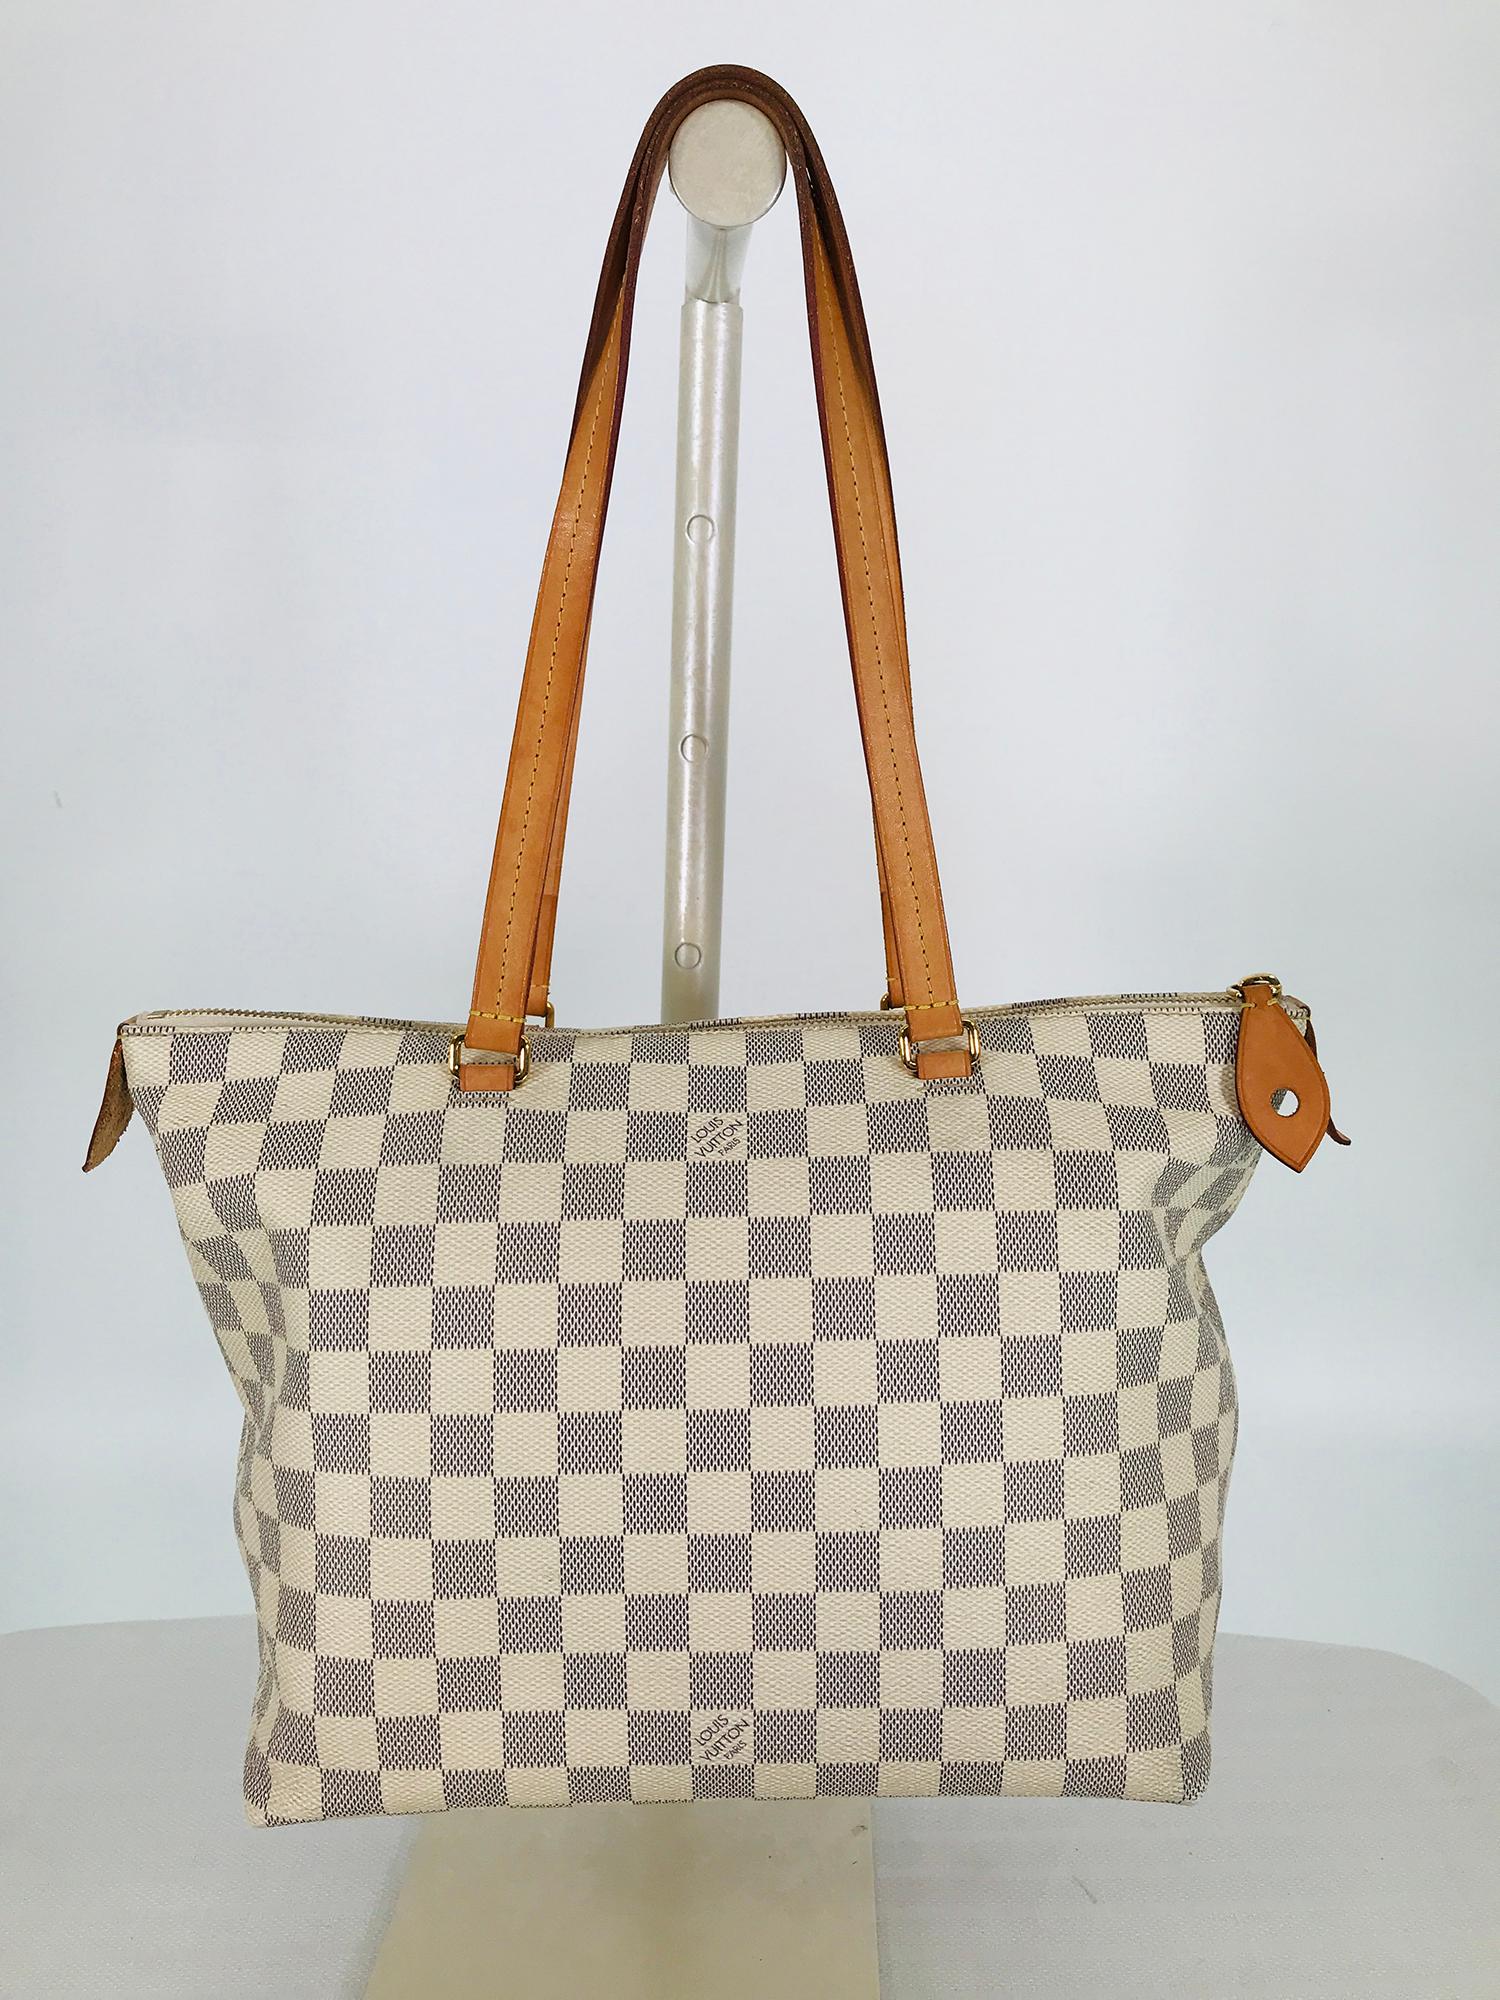 Louis Vuitton Damer Azur Lena canvas PM handbag. Coated canvas and leather, this Louis Vuitton bag is versatile, perfect for work or travel. Lightly structured bag has two vachetta leather handles with matching pull tabs and accents + gold brass